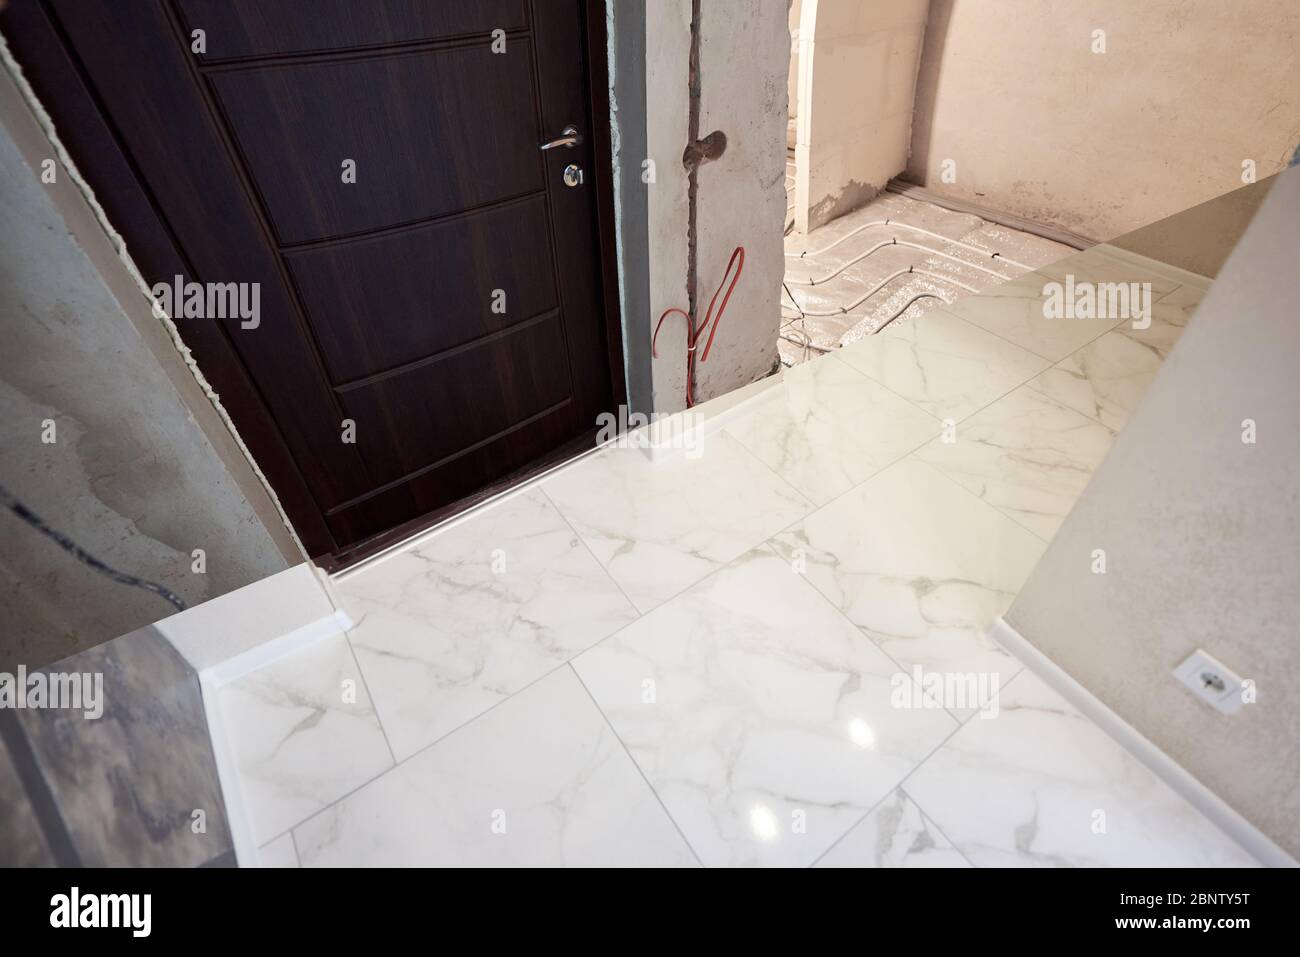 Comparison of old apartment with underfloor heating pipes and new flat with white marble floor and brown entrance door. Modern apartment before and after refurbishment. Concept of home restoration. Stock Photo